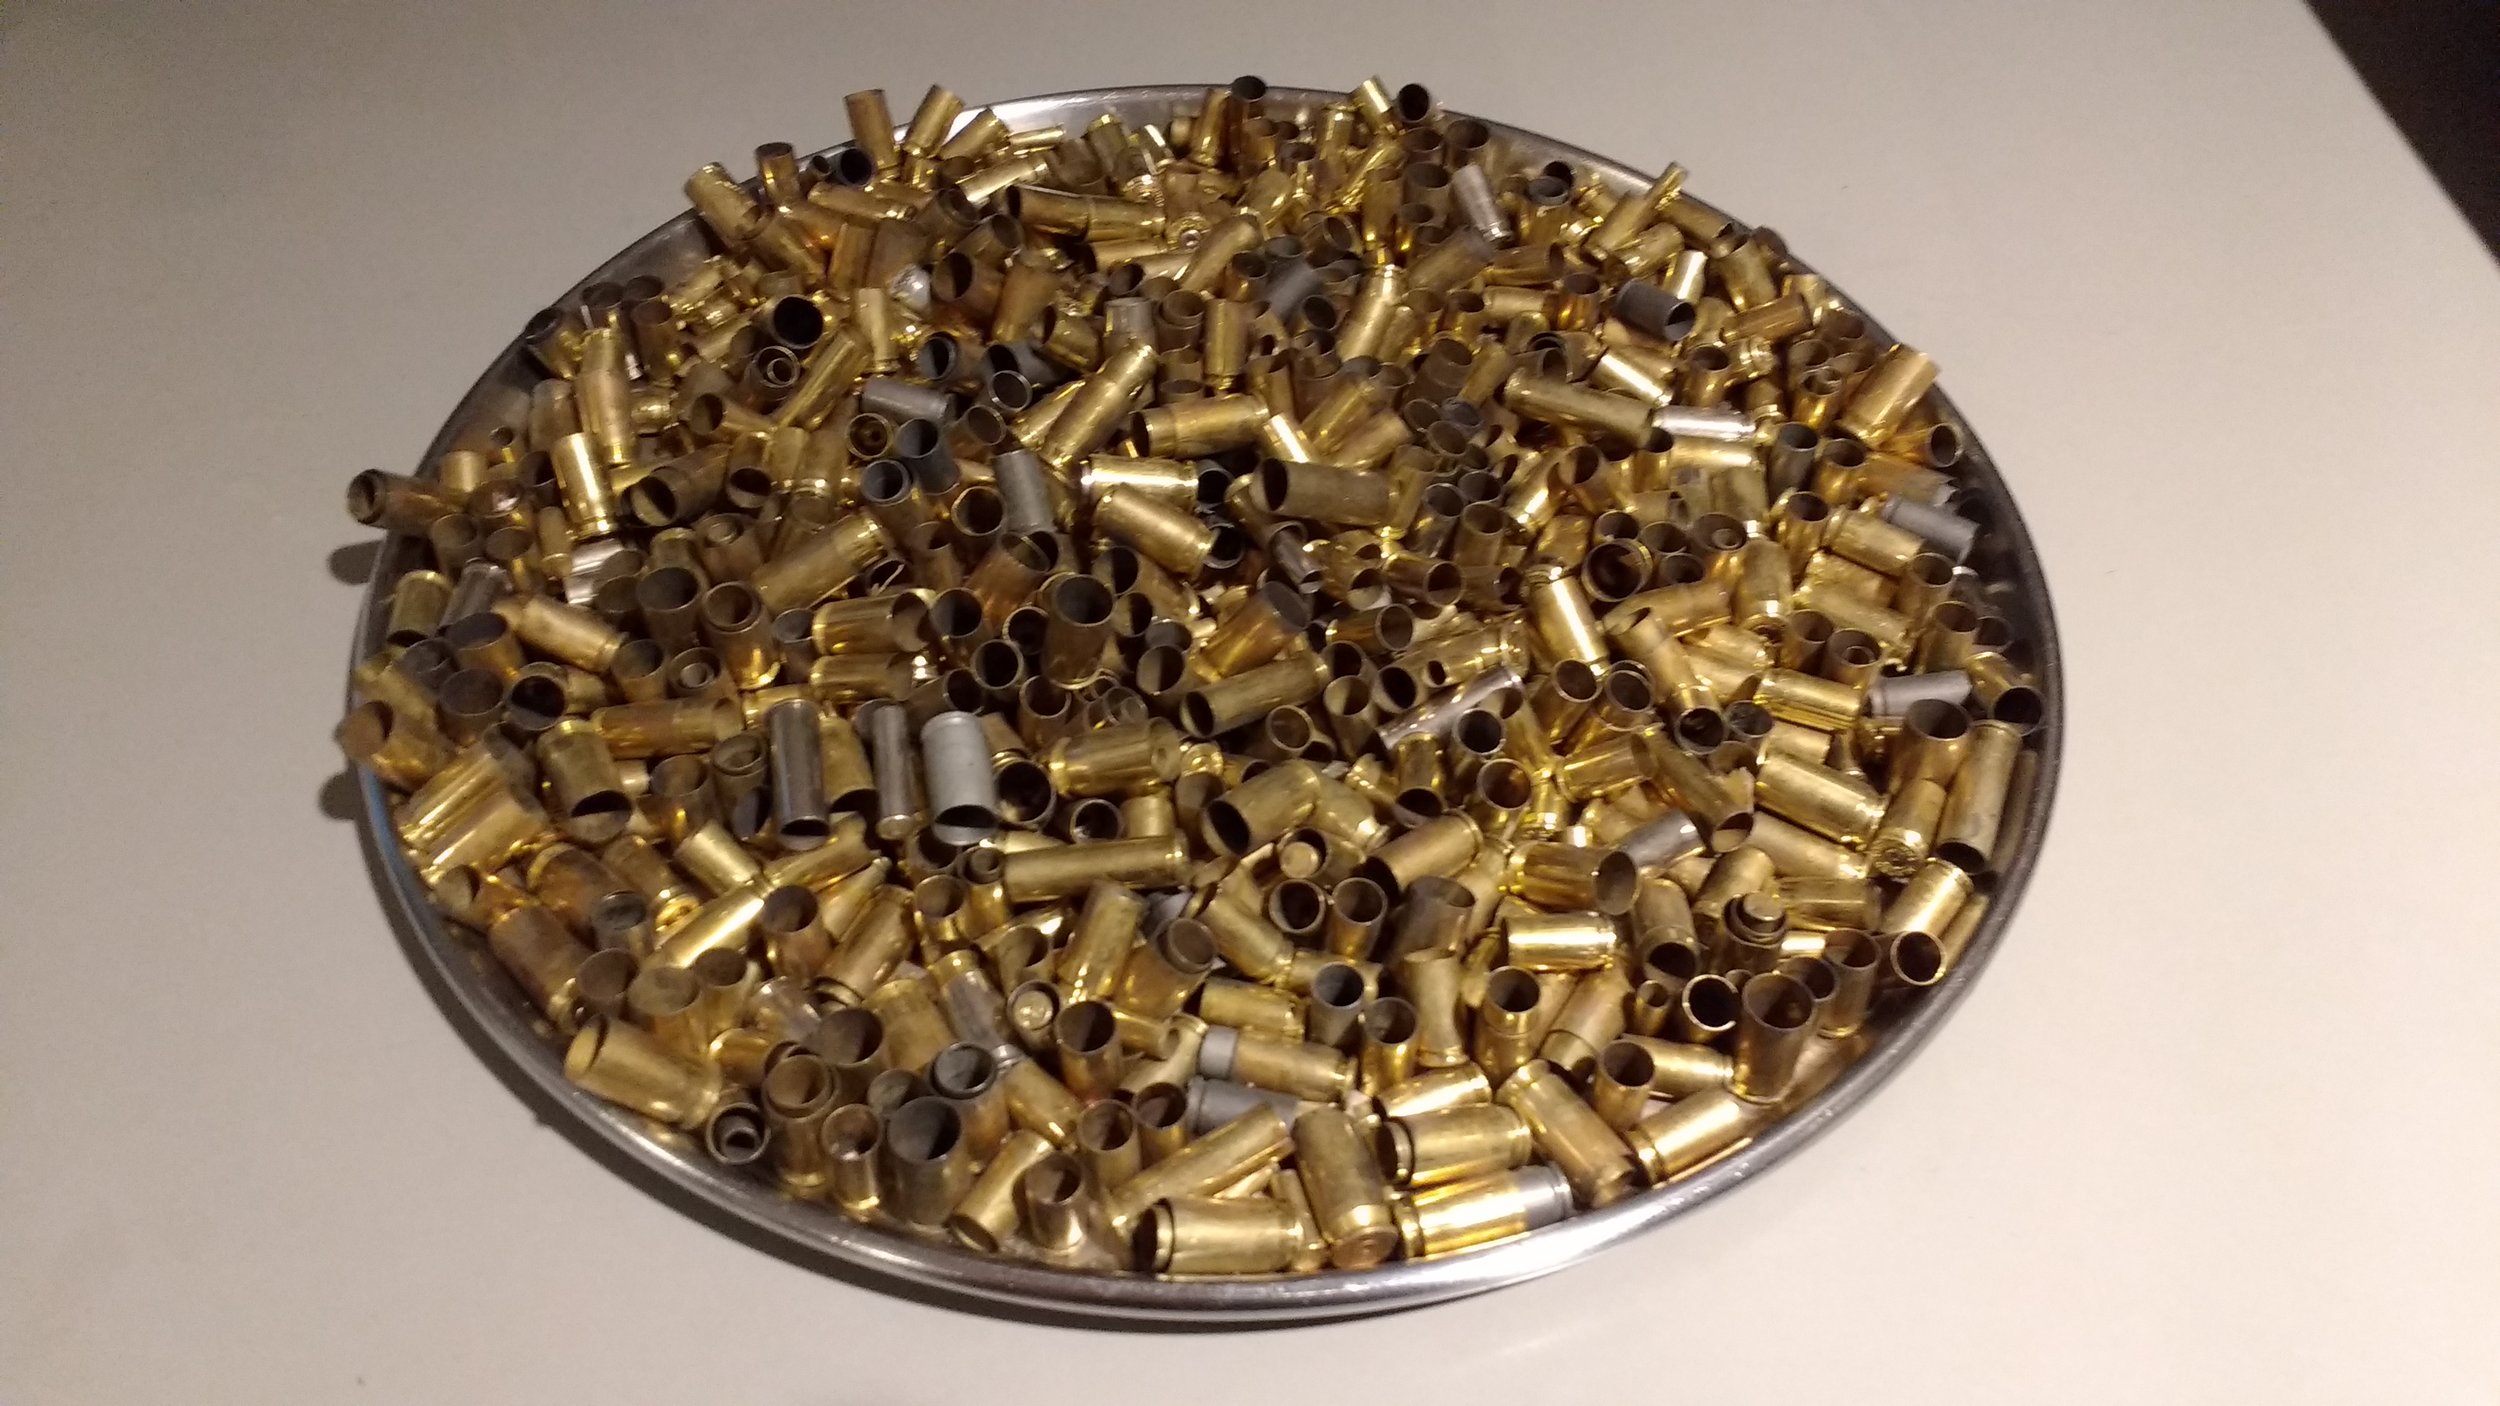 Shell Casings from bullets 